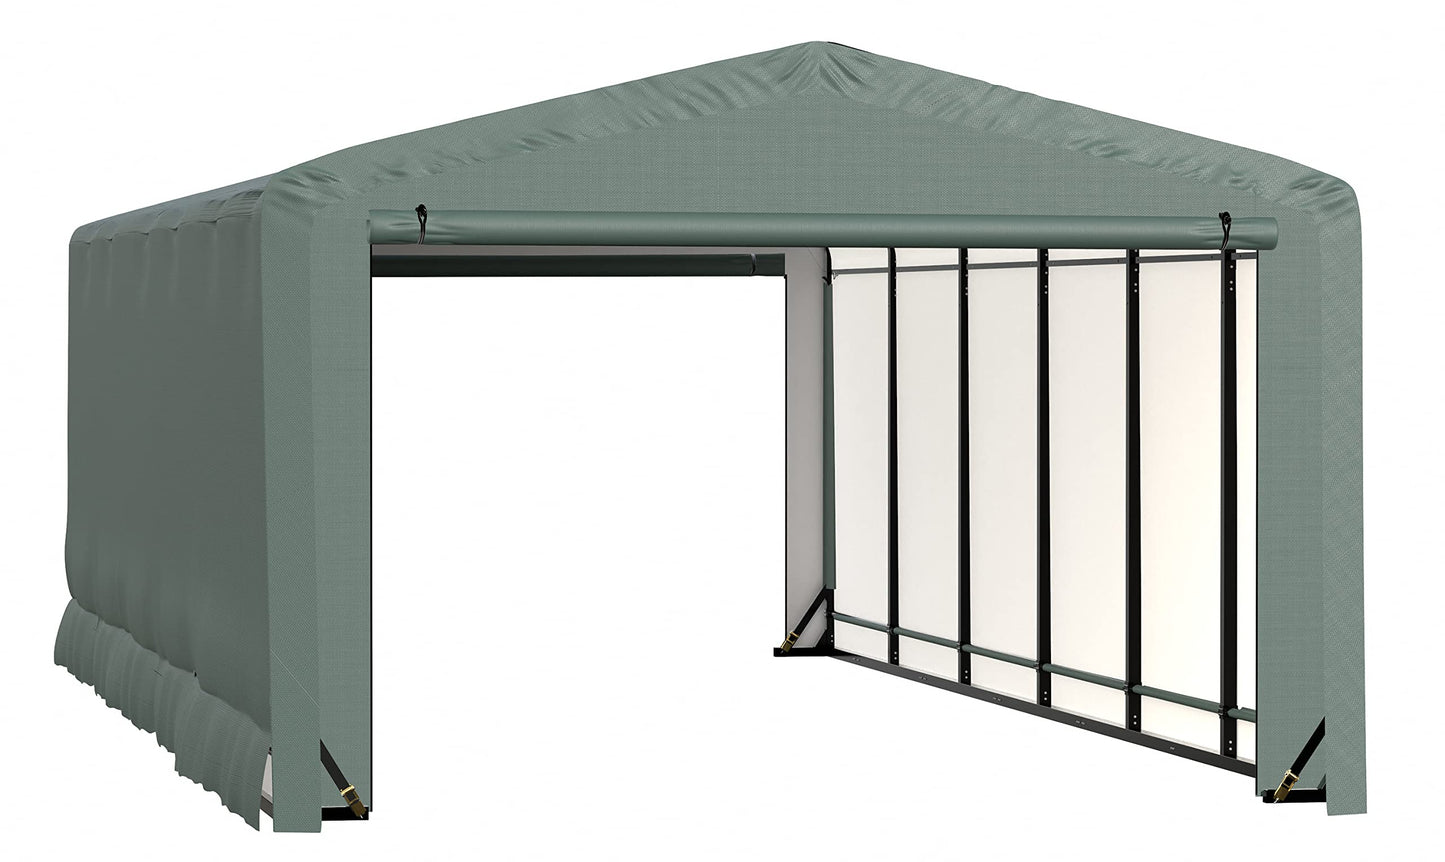 ShelterLogic ShelterTube Garage & Storage Shelter, 12' x 23' x 8' Heavy-Duty Steel Frame Wind and Snow-Load Rated Enclosure, Green 12' x 23' x 8'